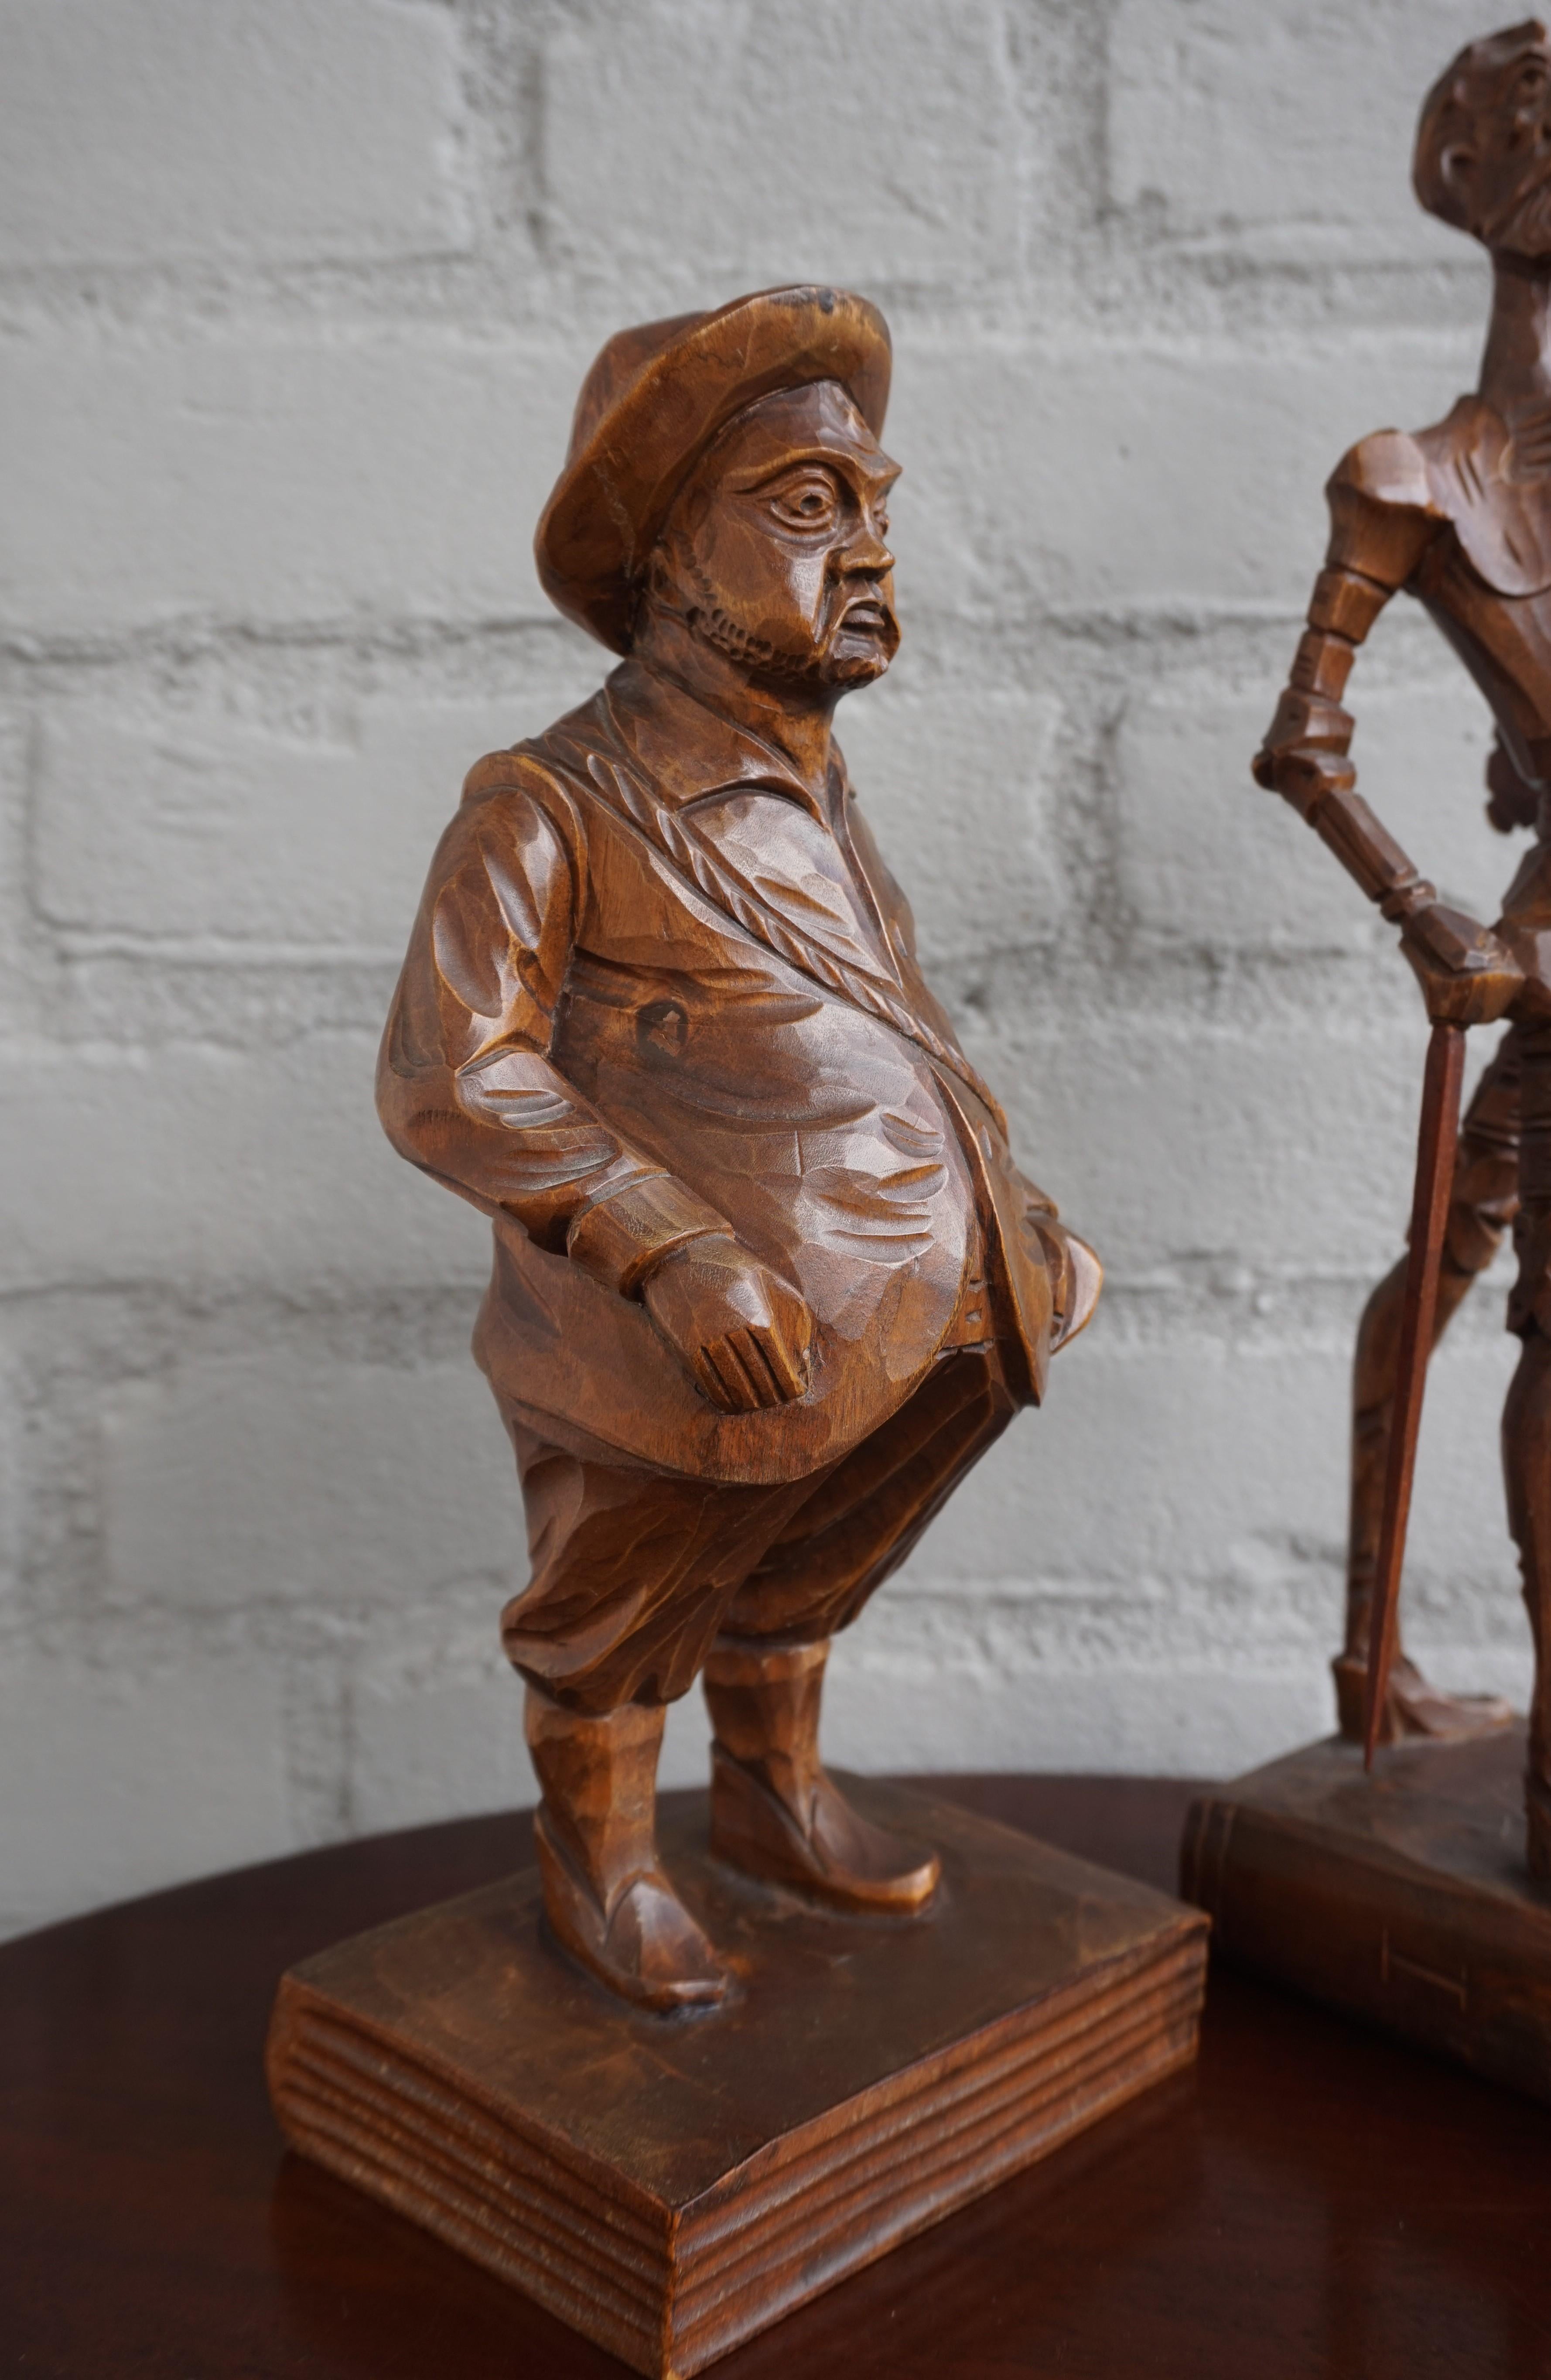 Hand-Carved Hand Carved Don Quixote and Sancho Panza Sculptures from the Arts & Crafts Era